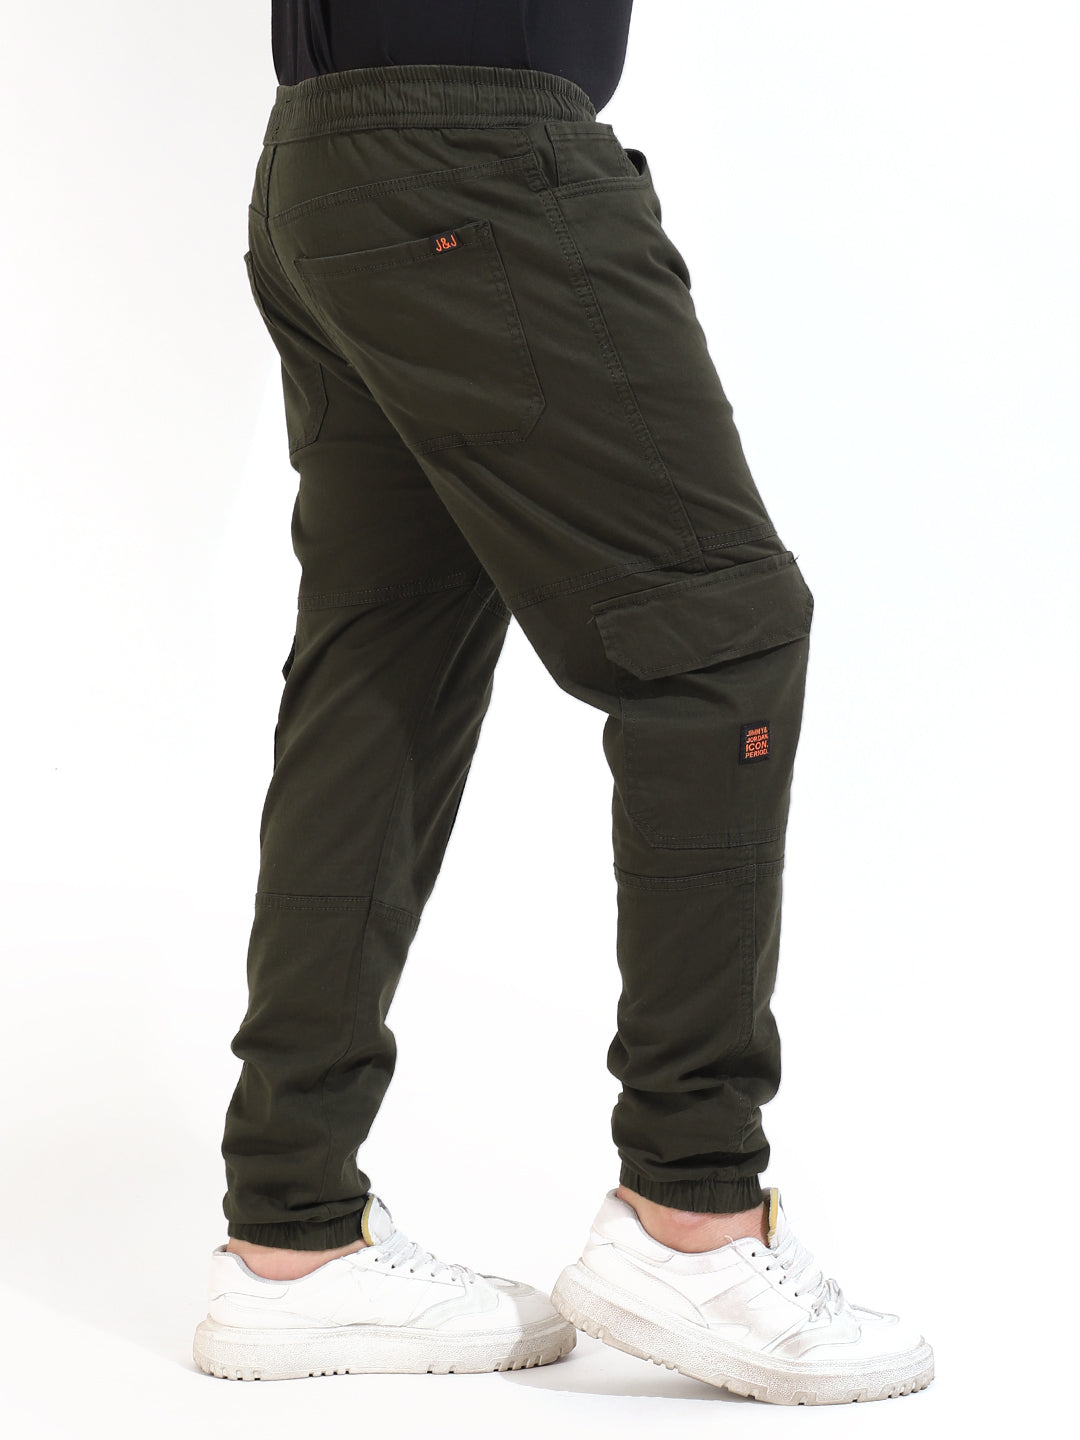 Latest Style casual Wear Cargo Pants For Men (Black)